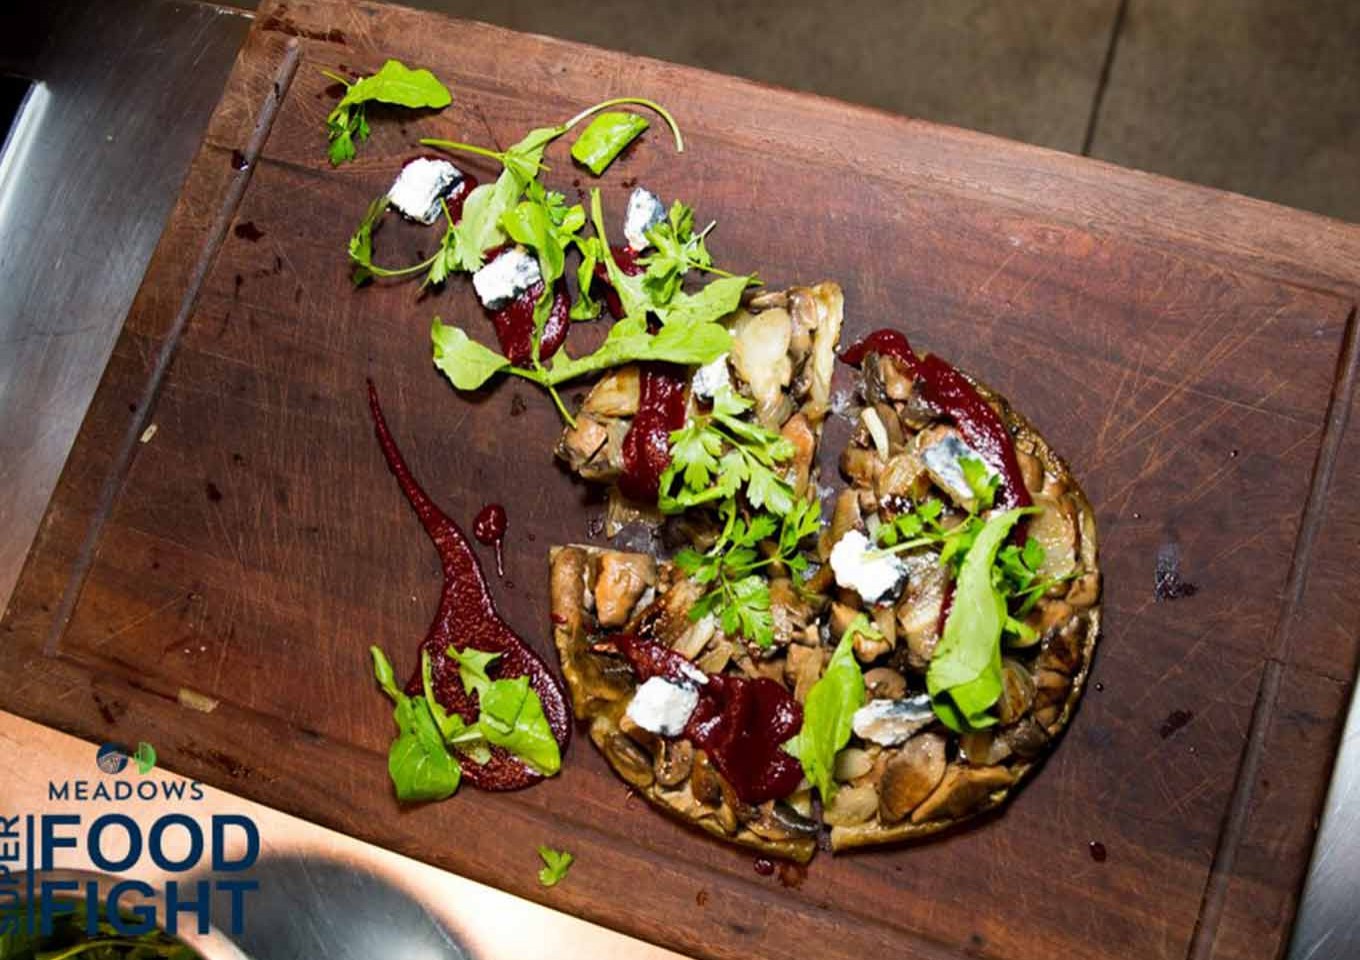 Michael Van Elzen's Smoked Mushroom Tart with Ashed Goat’s Cheese and Beetroot Syrup